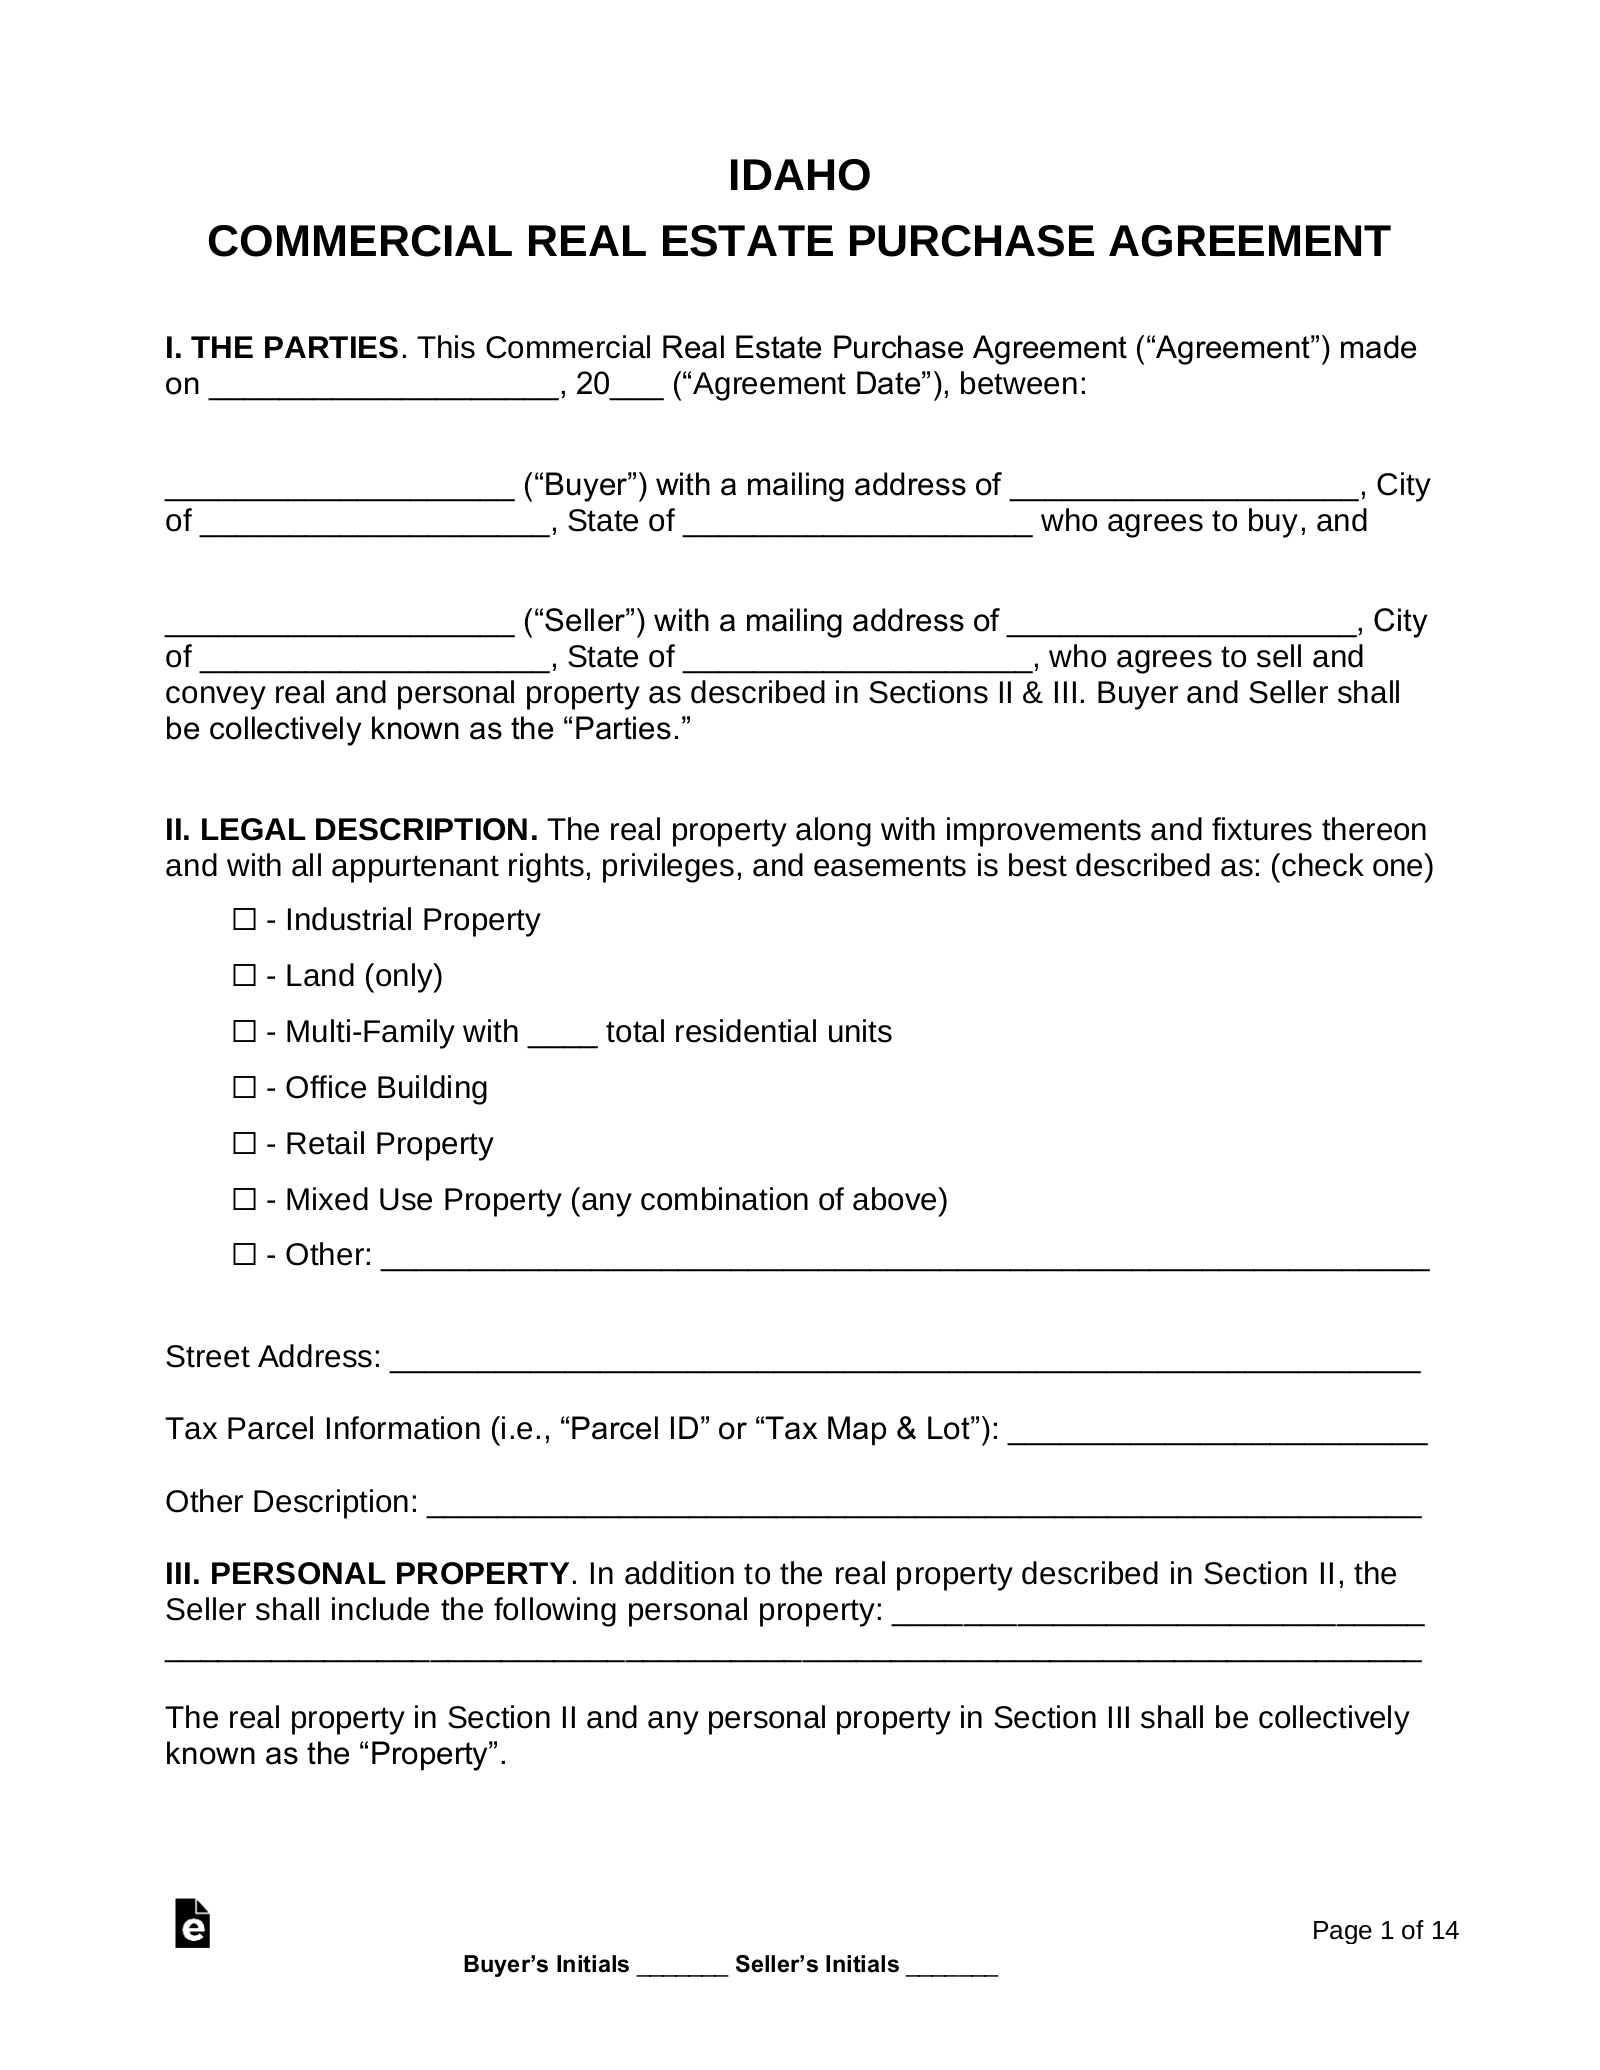 Idaho Commercial Real Estate Purchase and Sale Agreement